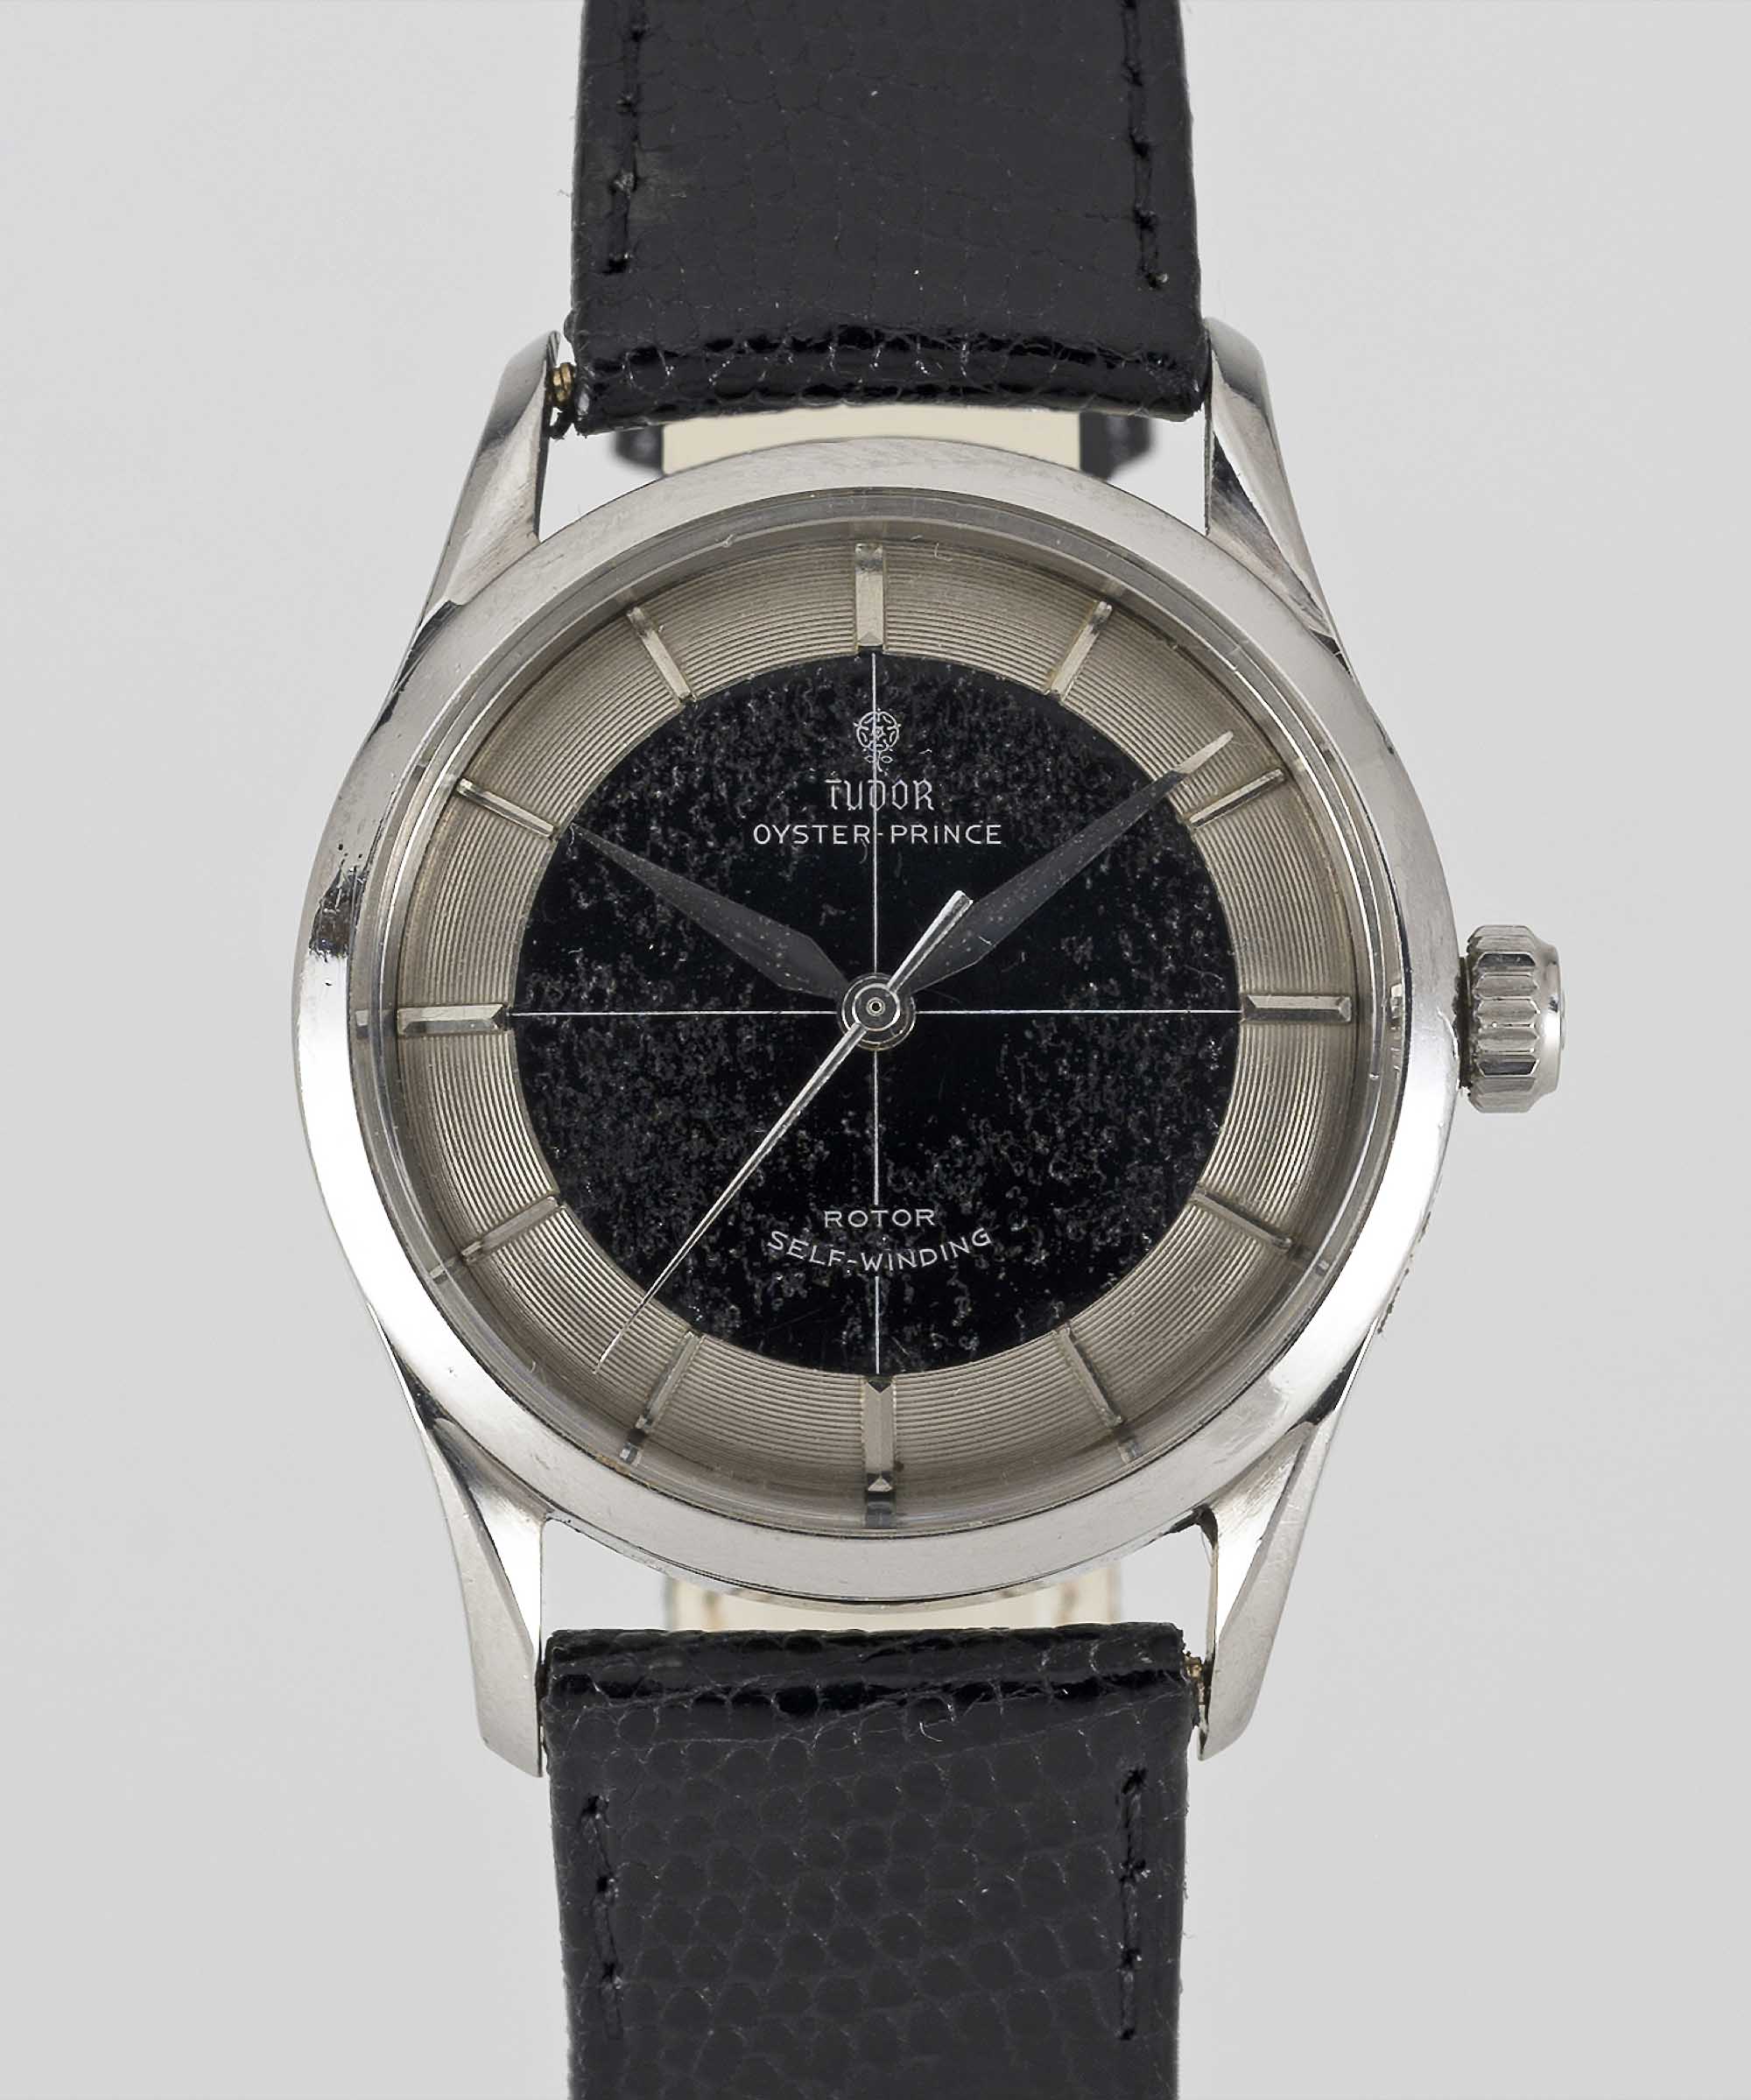 A GENTLEMAN'S STAINLESS STEEL ROLEX TUDOR OYSTER PRINCE "TUXEDO" WRIST WATCH CIRCA 1957, REF. 7967 - Image 2 of 9